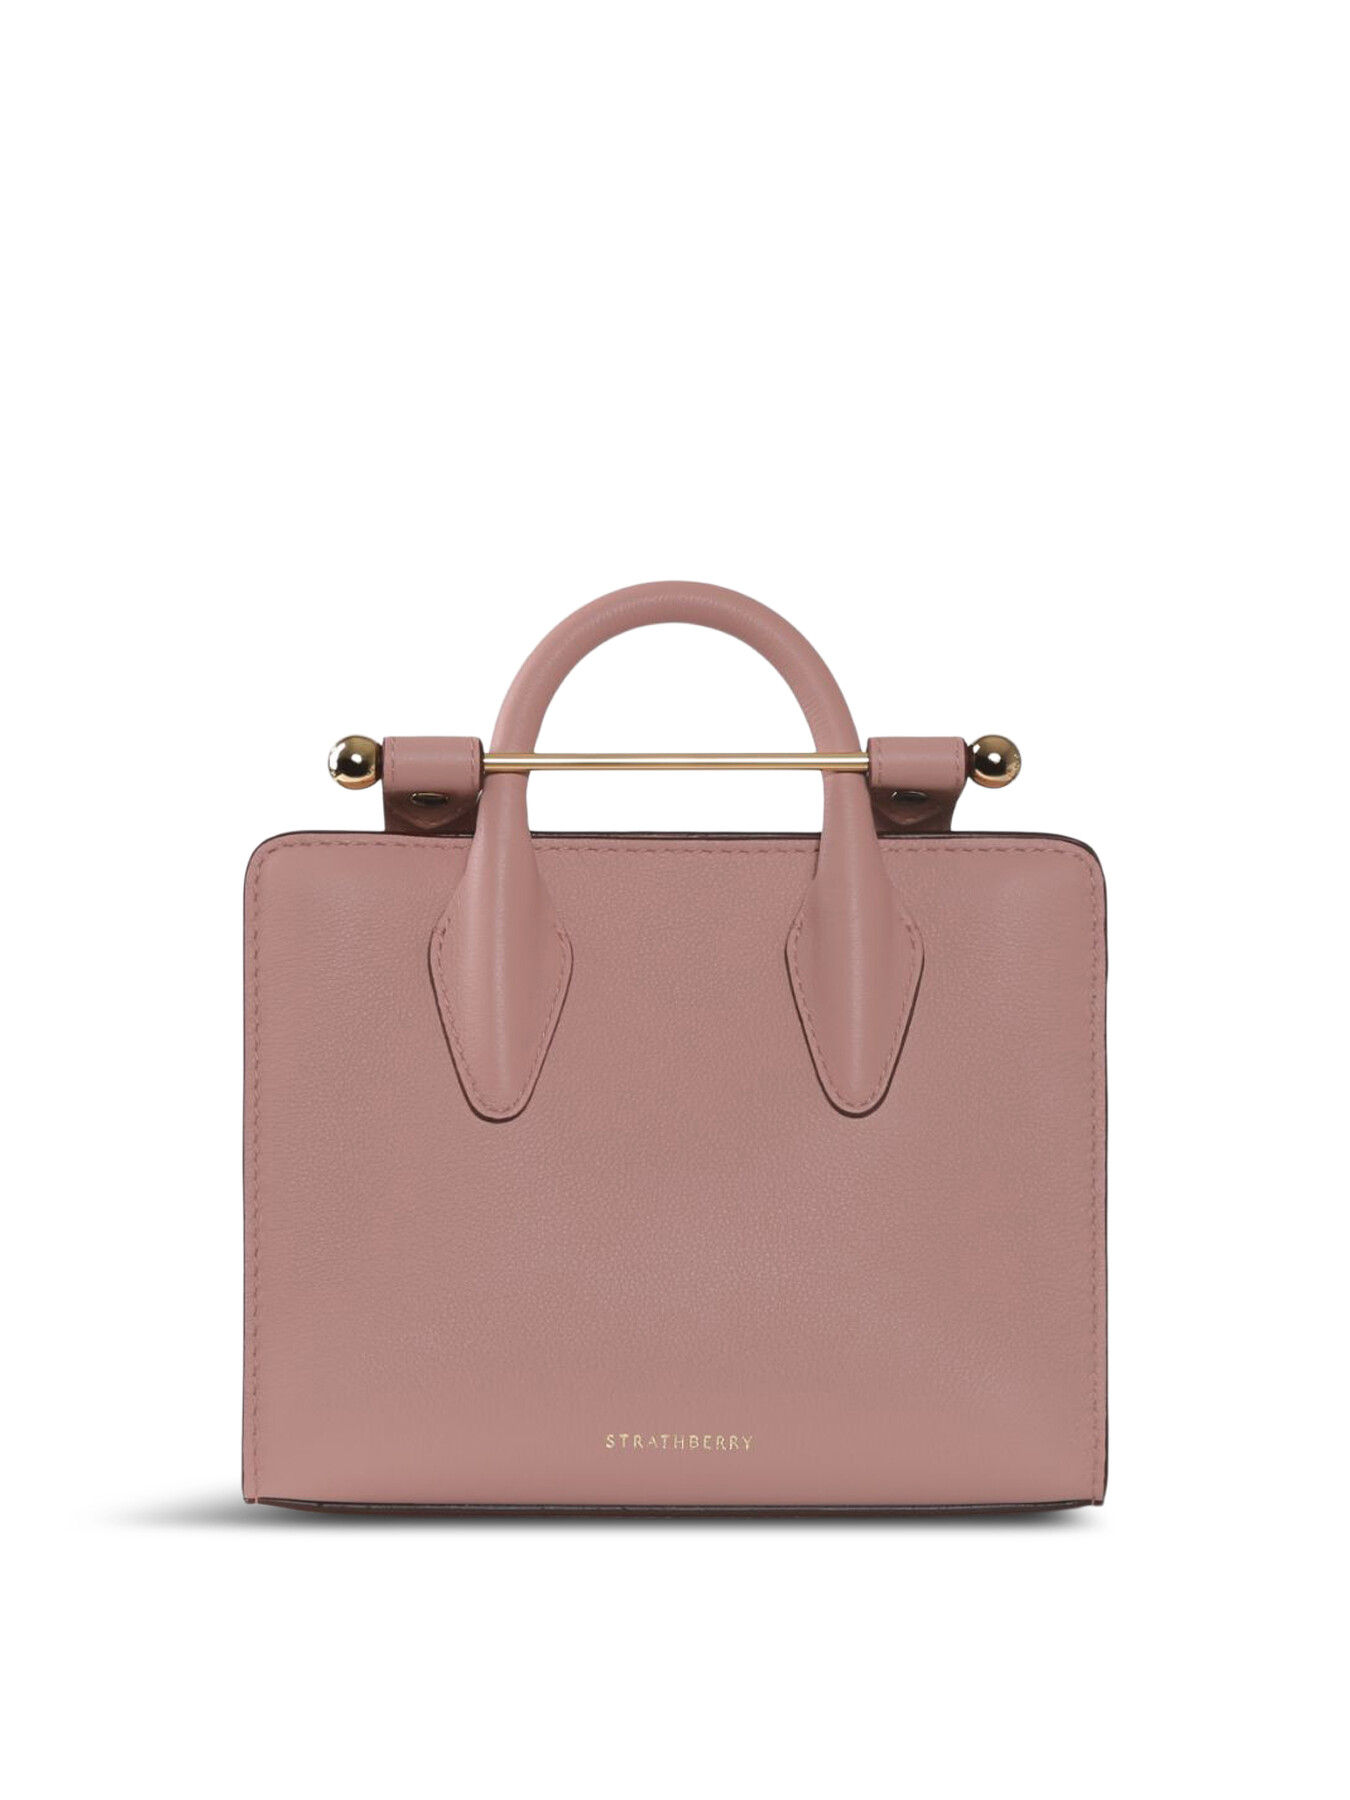 The Strathberry New Bag You Need Now